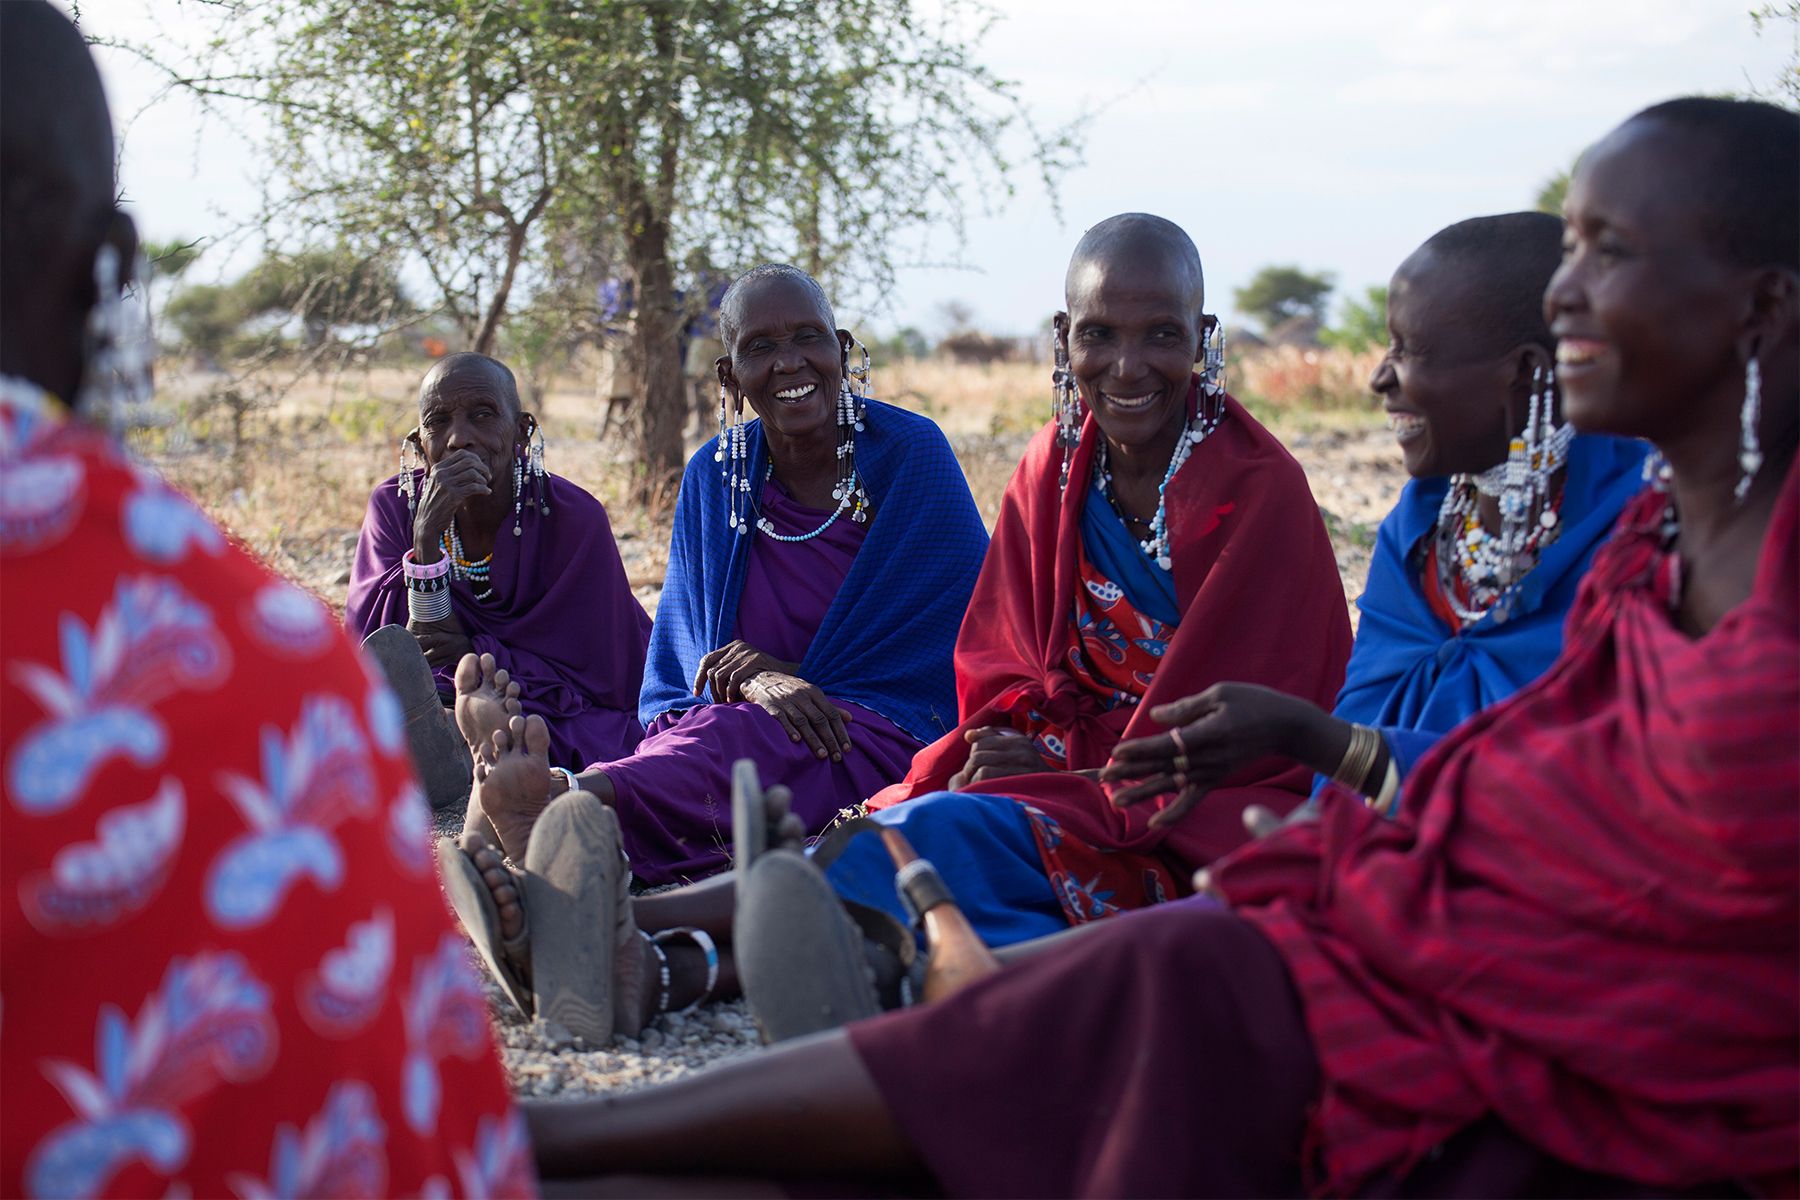 In Tanzania, the Kinapa (“We Carry Each Other”) women’s group of the Oltukai village meets beside the local primary school to discuss whether they should open a bank account. Throughout the past century, Maasai men have been the sole financial providers for their families, but with droughts and dwindling land access due to conservation, men are less able to provide. Many women have foregone societal norms and started businesses selling small goods, like petroleum jelly or snuff tobacco. In recent years, NGO